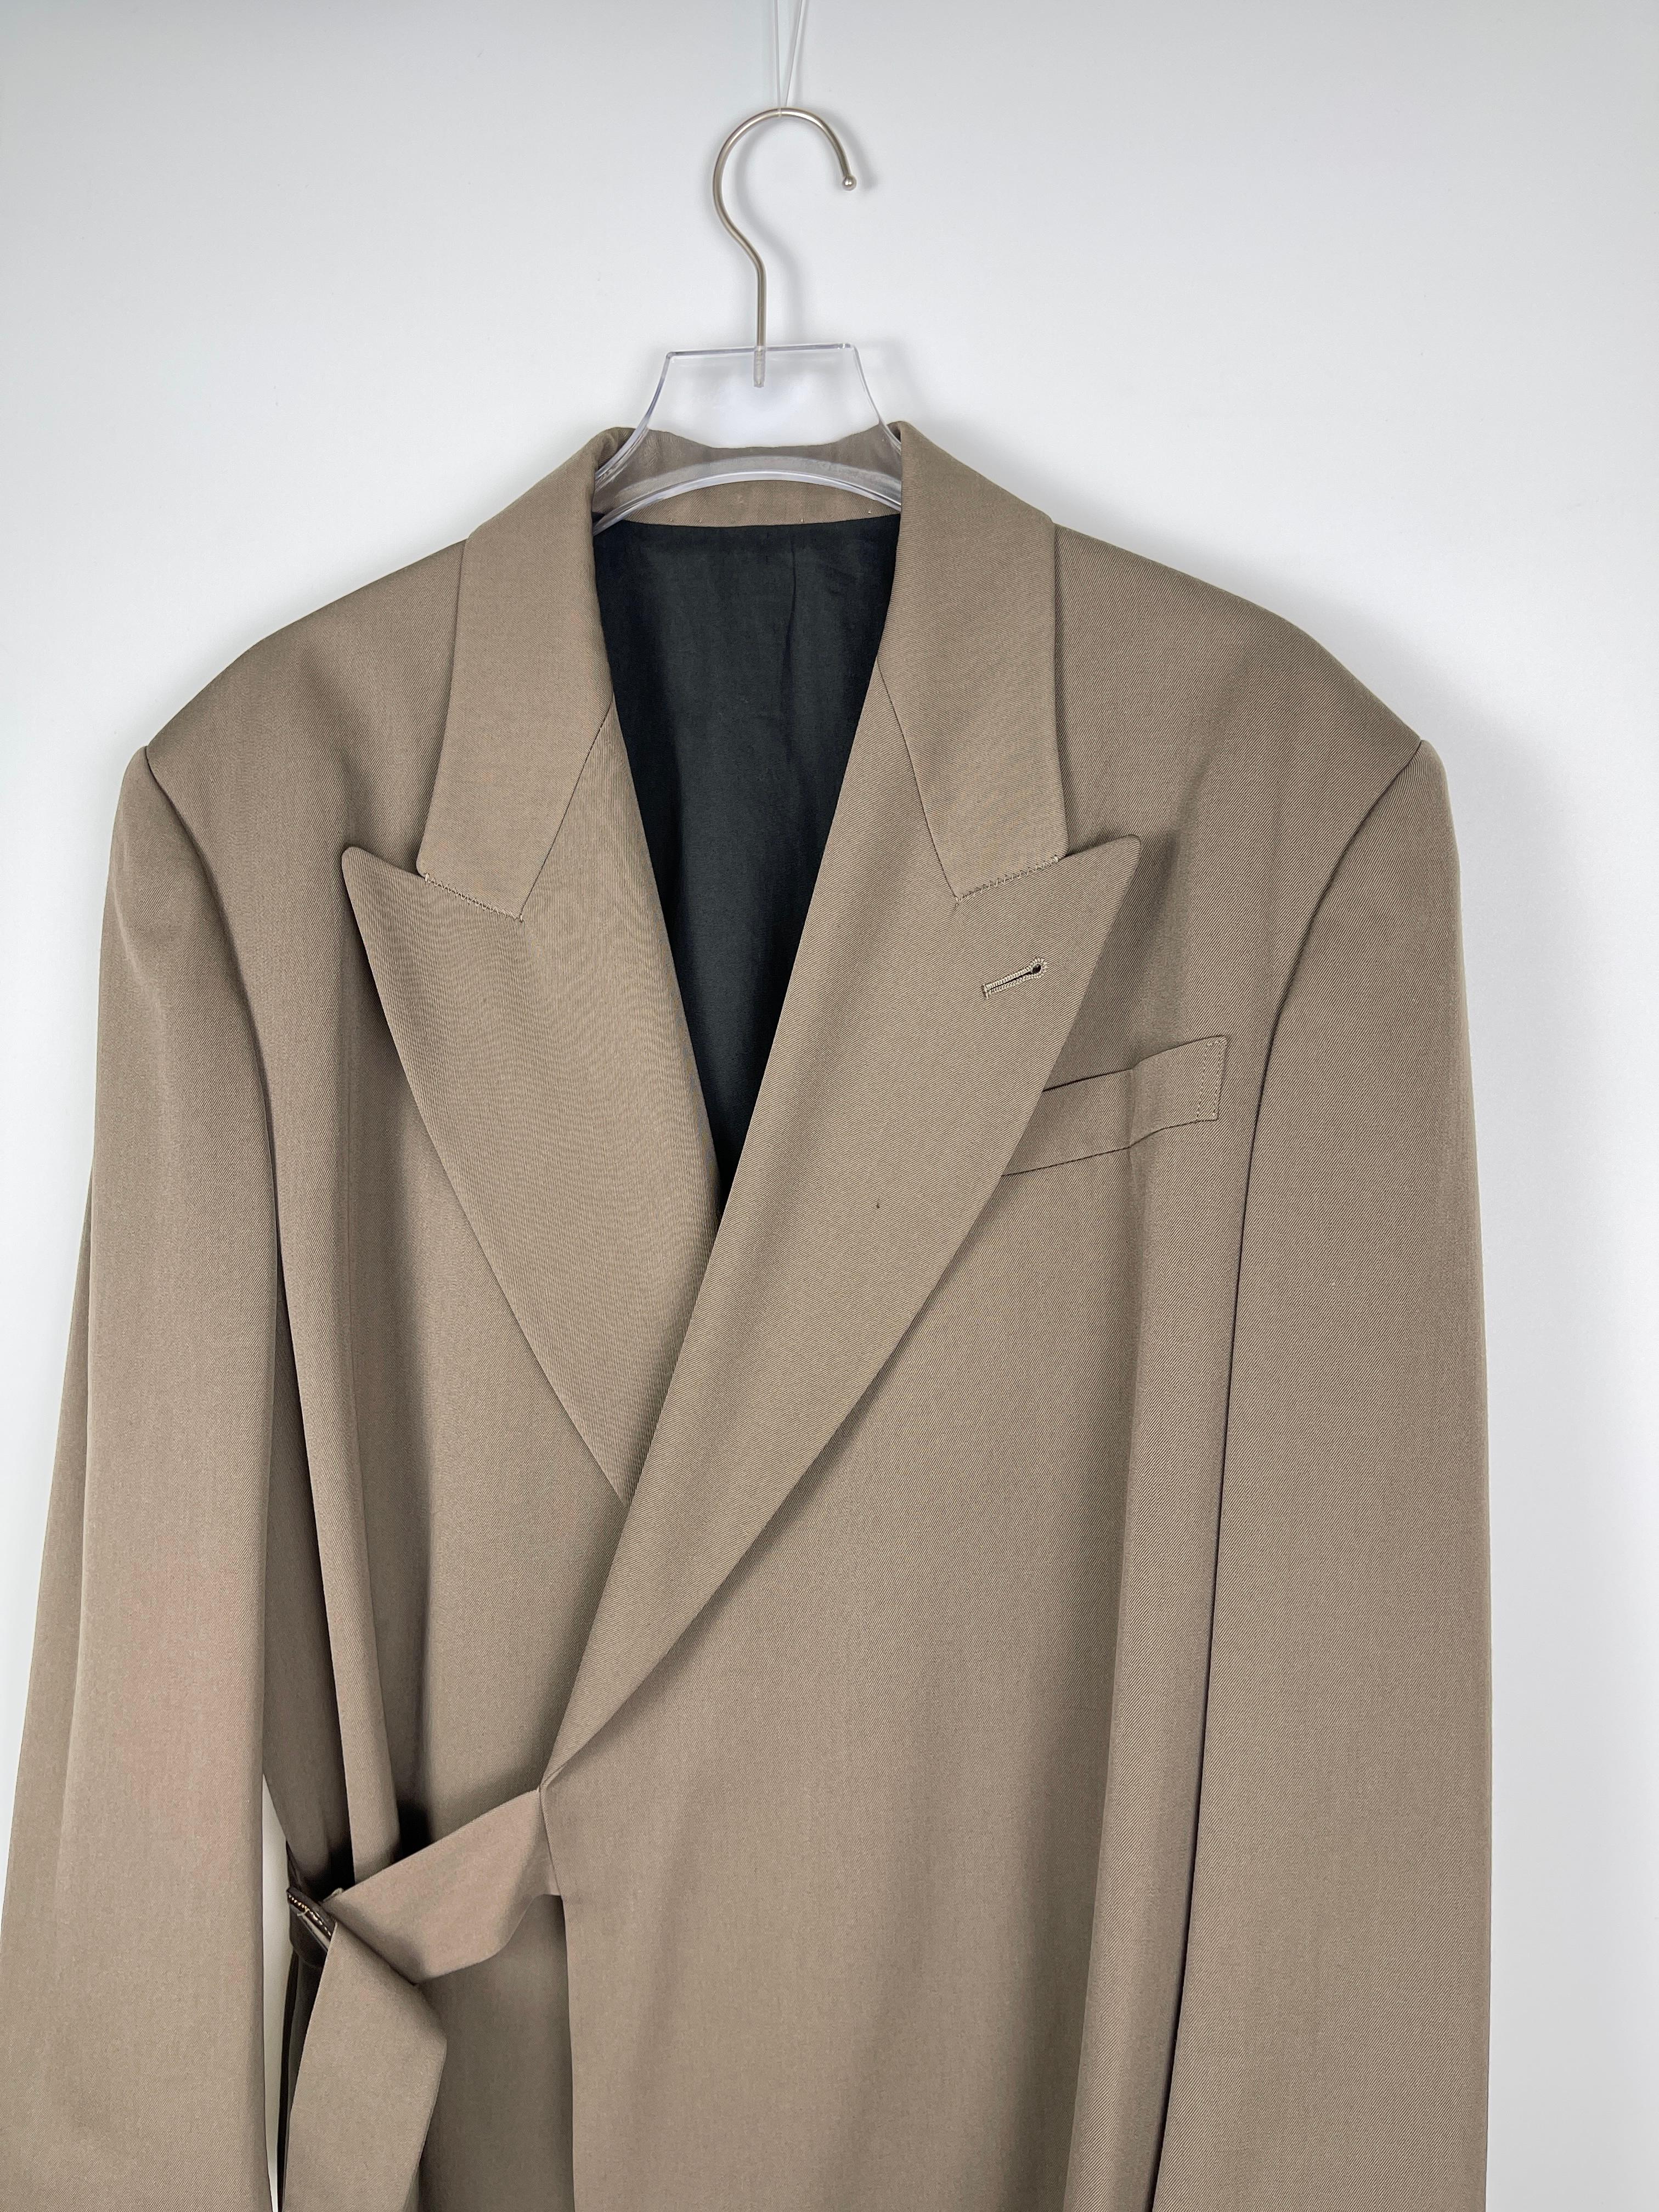 Jean Paul Gaultier HOMME 1990's Belted Coat For Sale 7